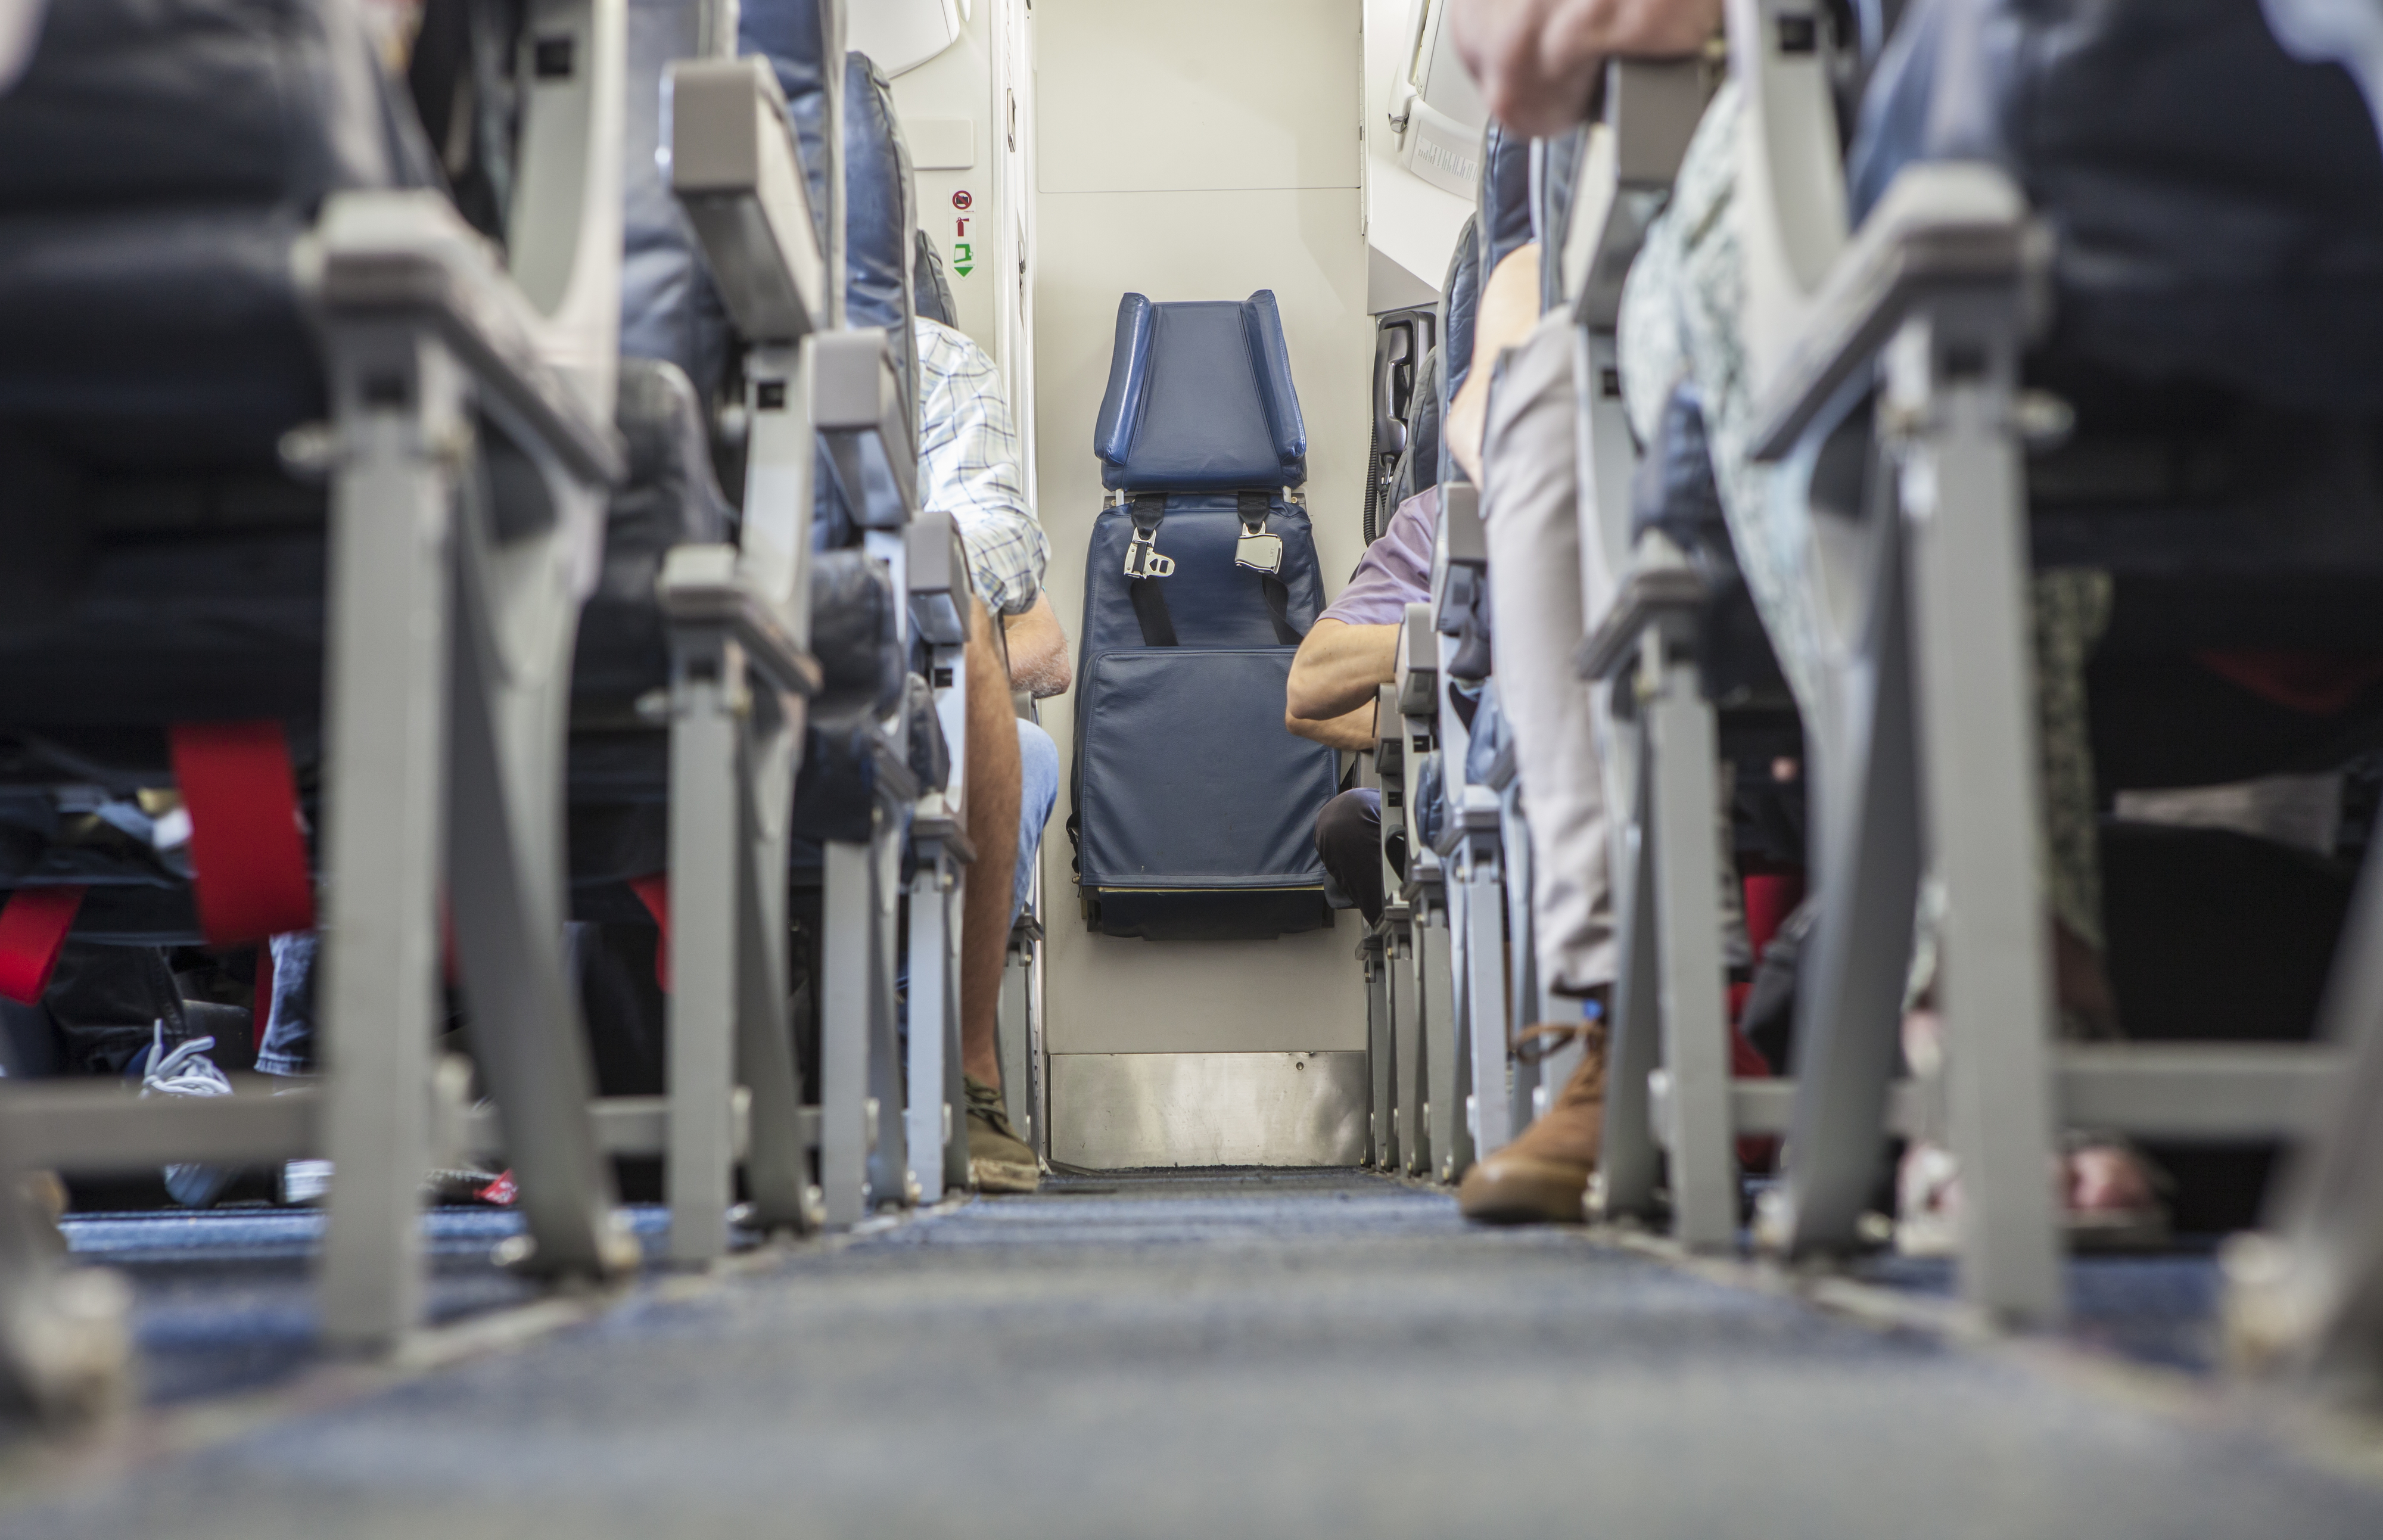 View down an airplane aisle with passengers seated on either side, facing forward